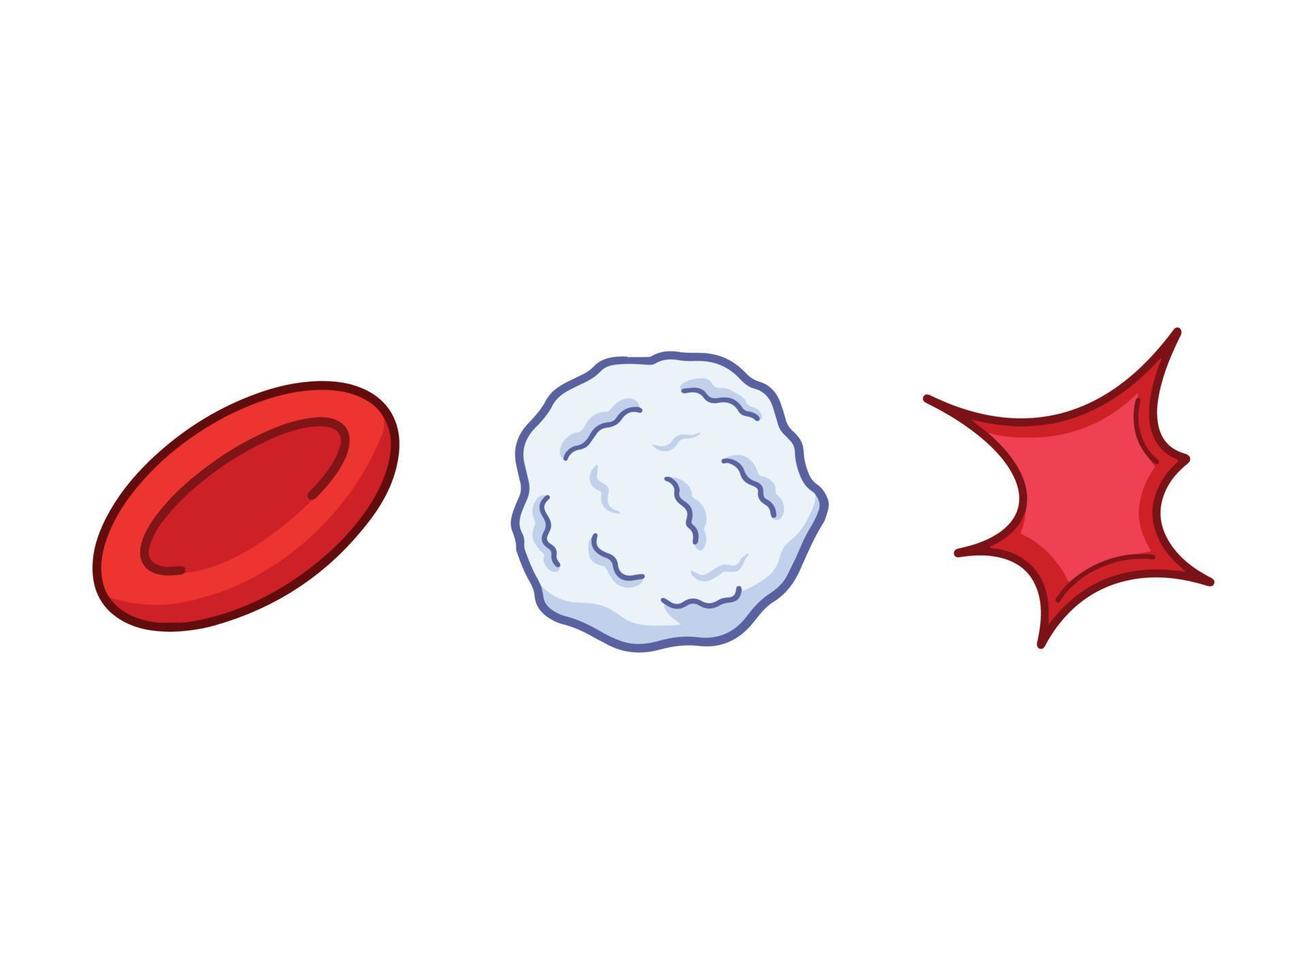 Sets of blood cells with clean outline line arts vector illustration isolated on white background. Pictogram drawing with cartoon flat art style for healthcare biology student education.